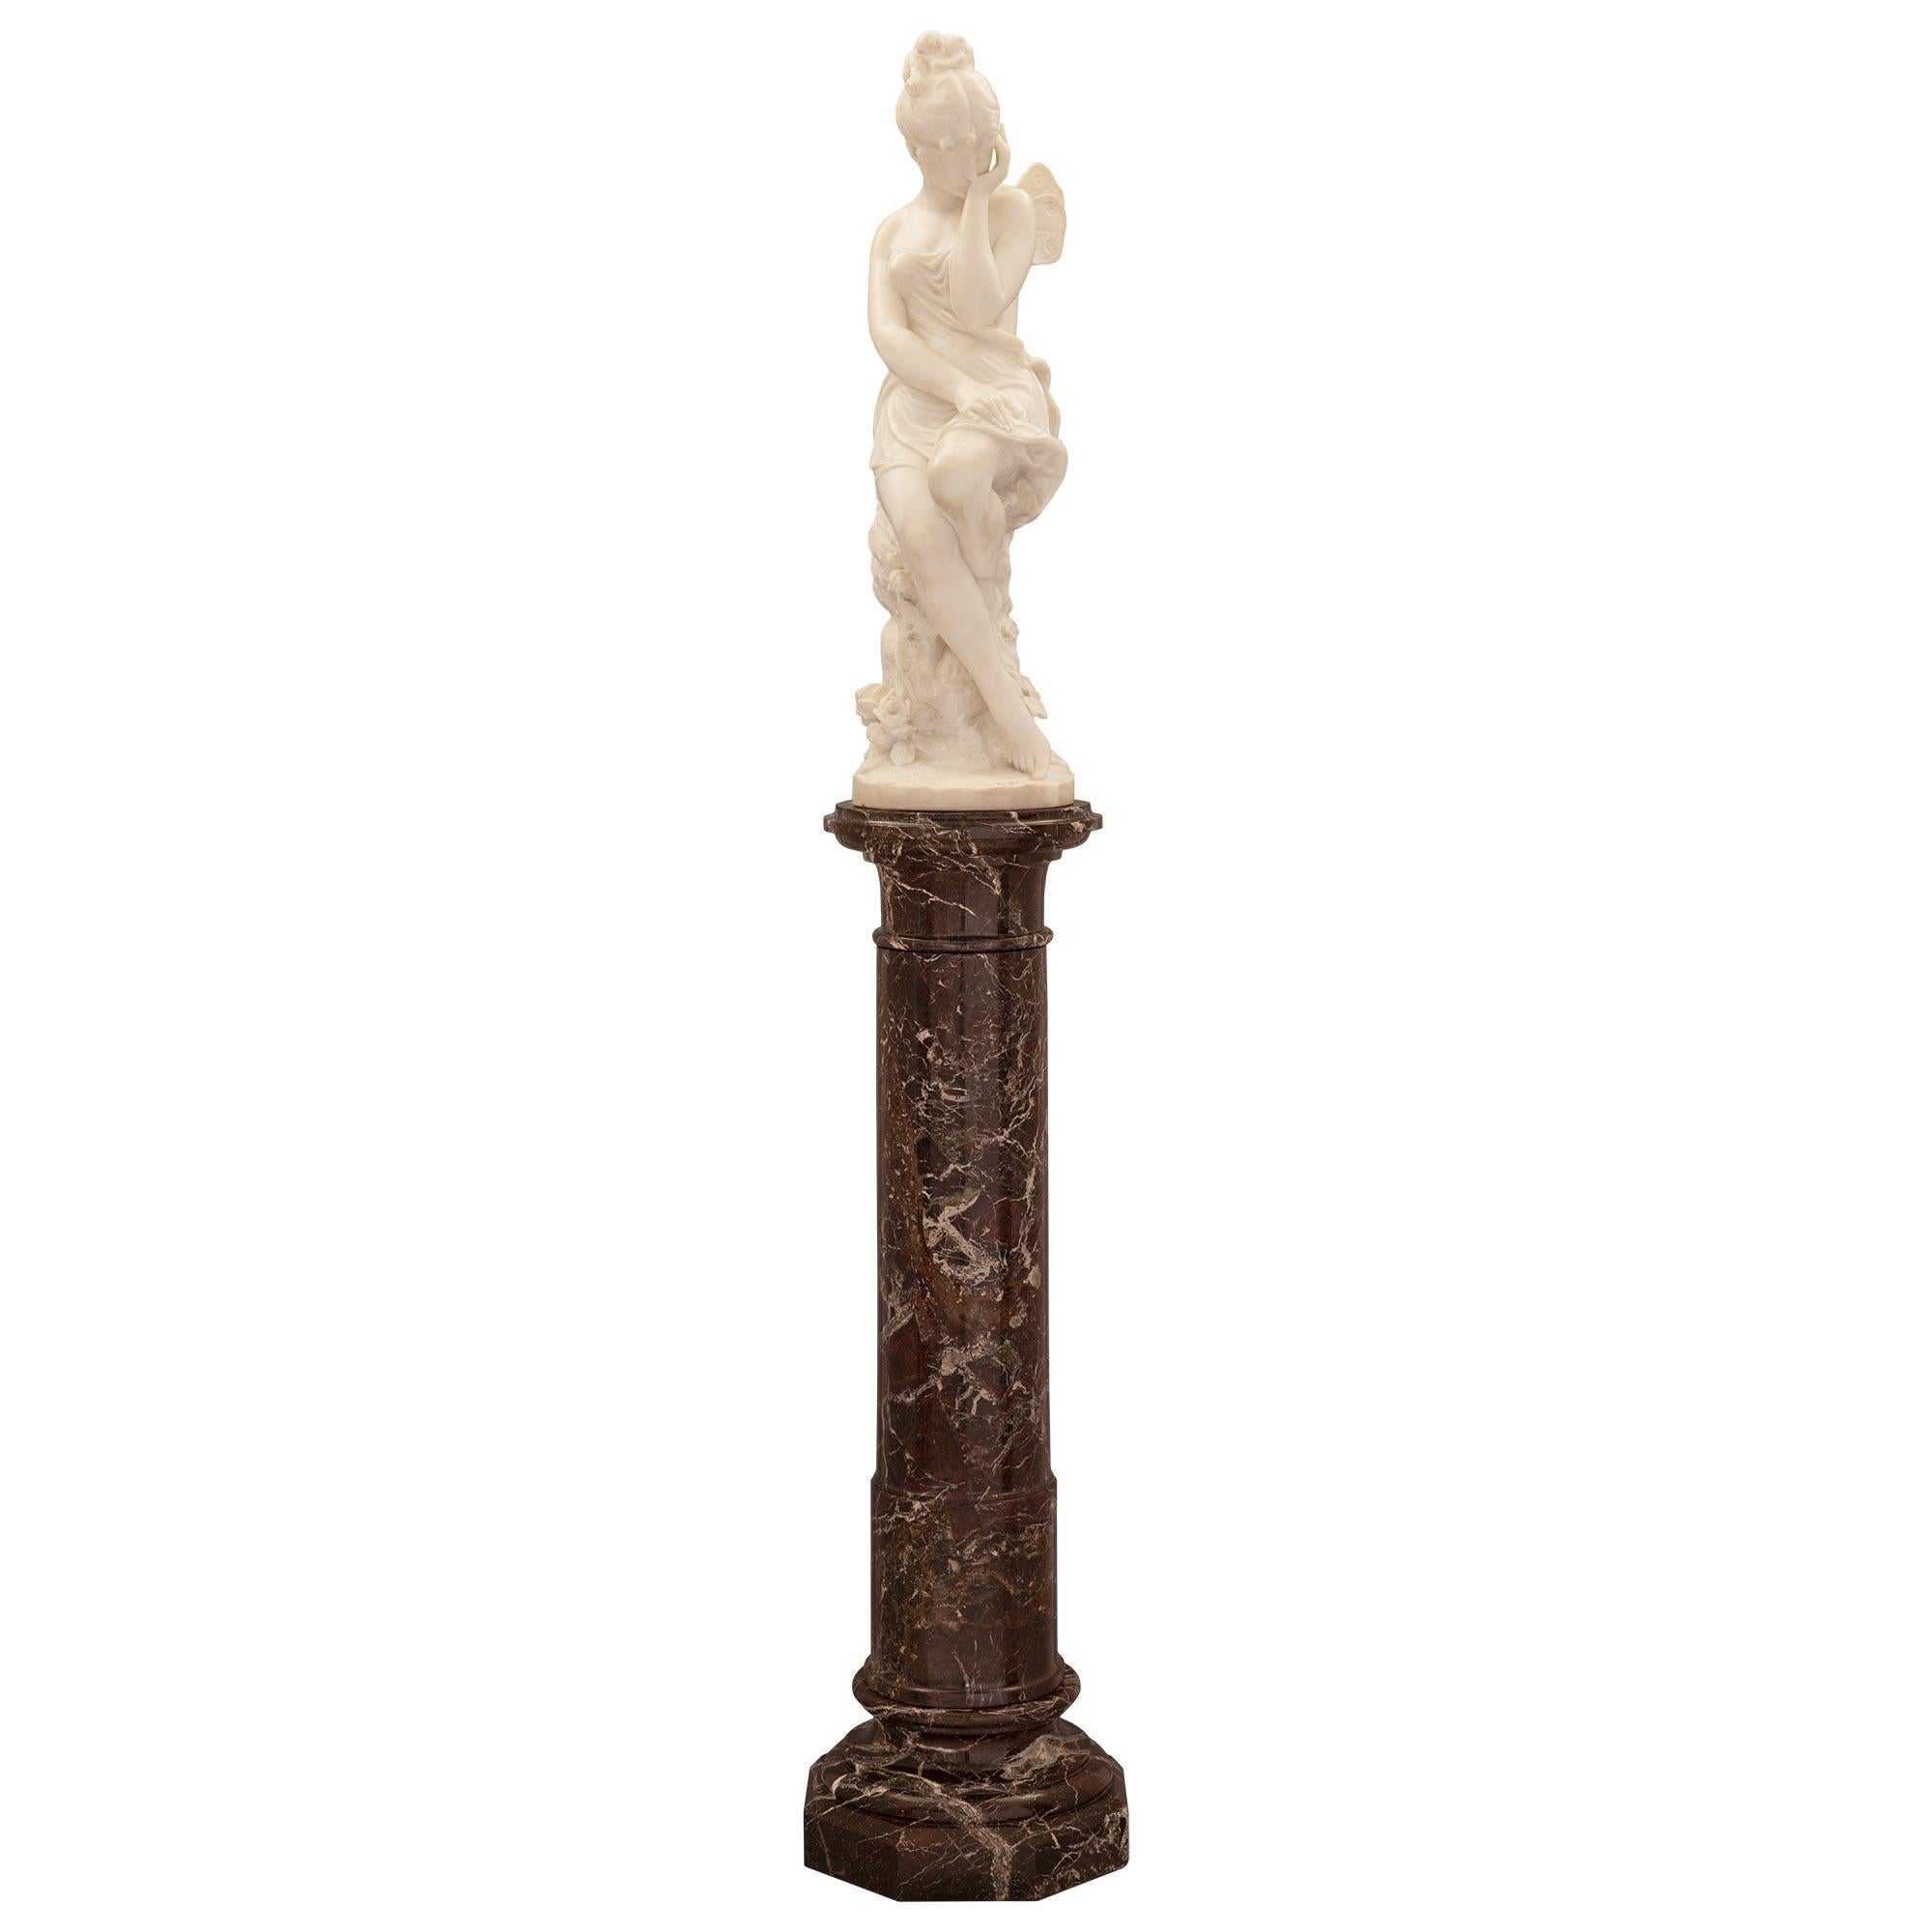 A stunning and very high quality Italian 19th century white Carrara marble statue title Psyche Abandoned on her original Rosso Levanto marble pedestal. The Rosso Levanto column is raised by an octagonal base with a fine circular socle shaped support